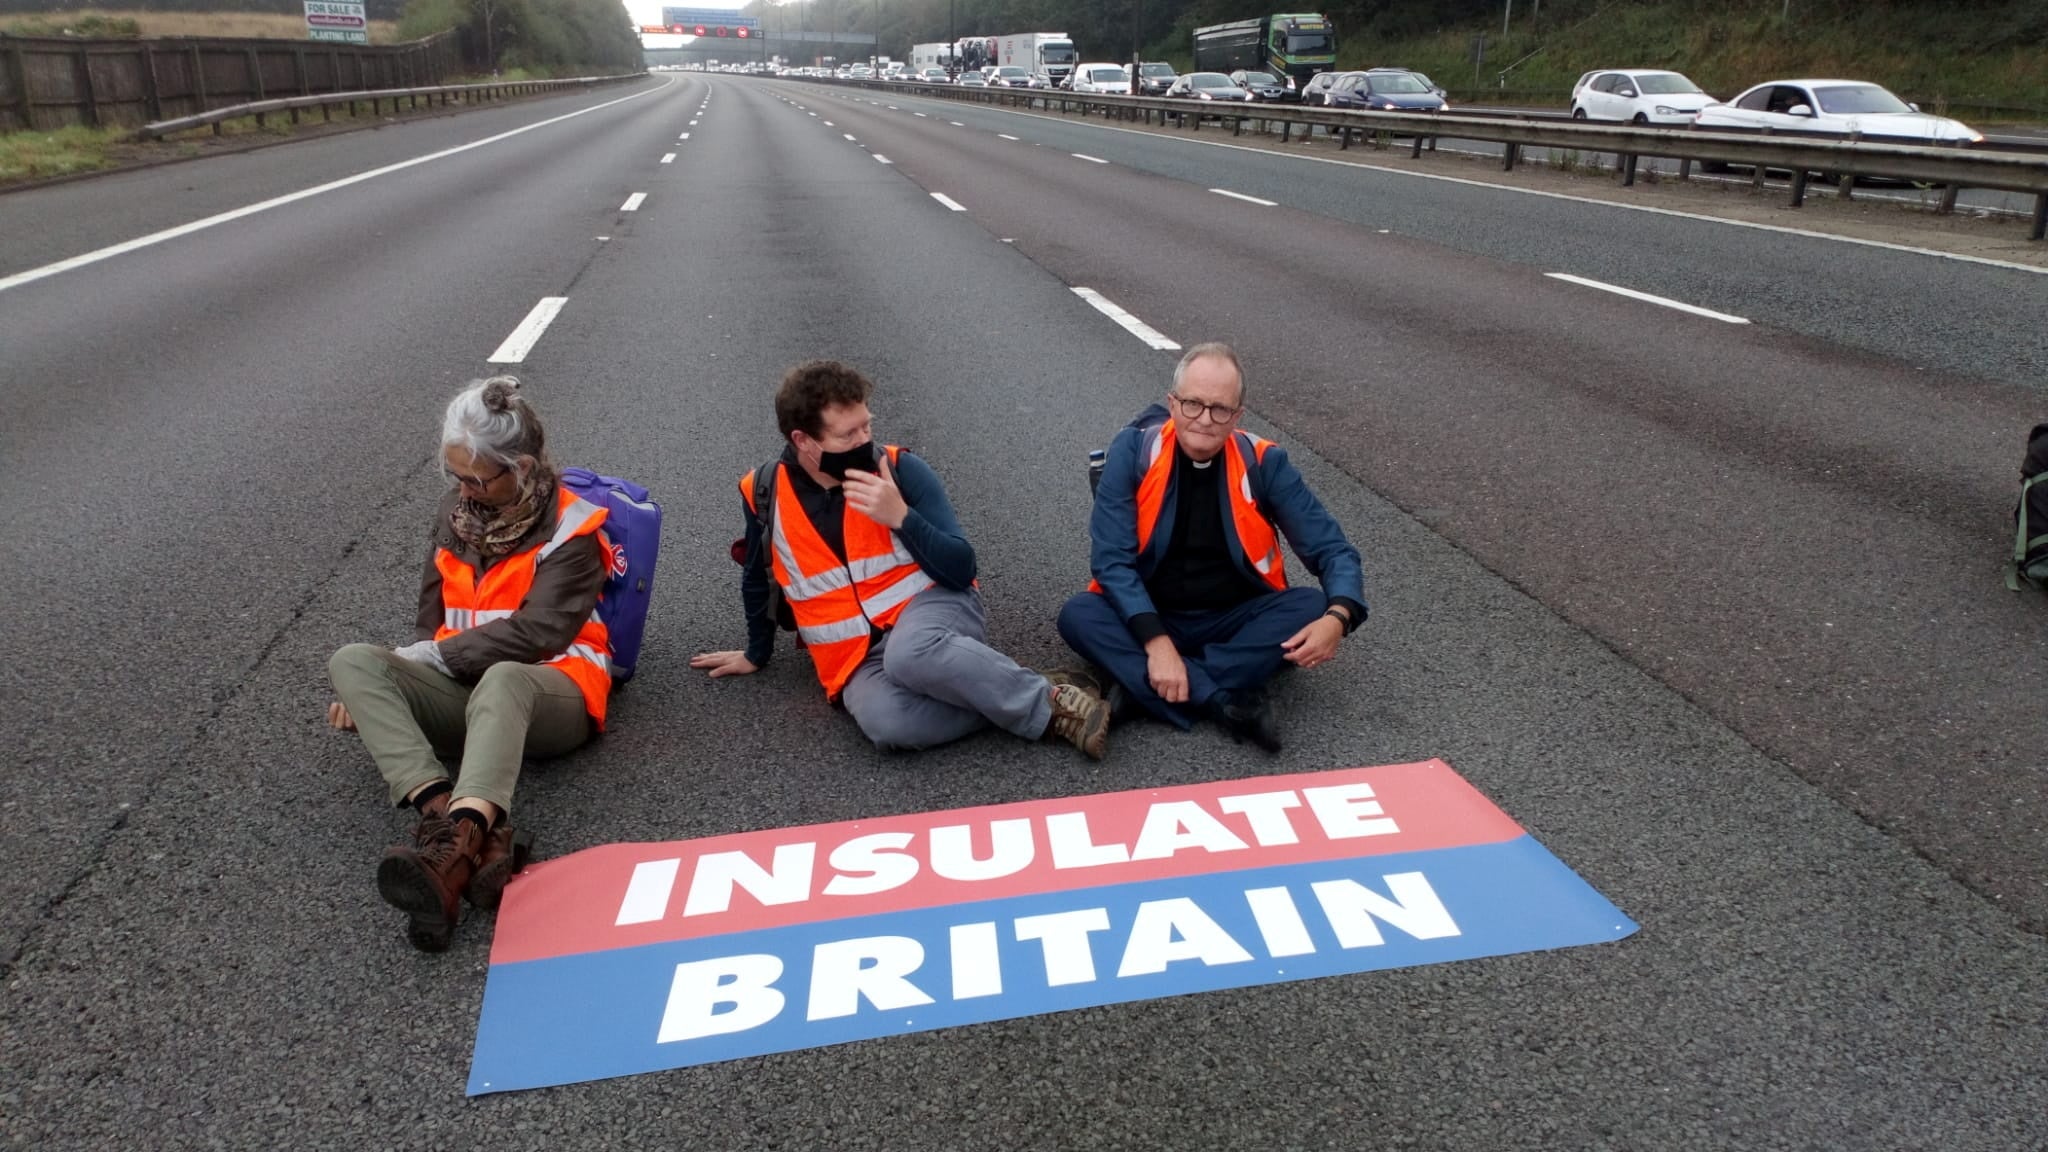 Members of Insulate Britain blocked parts of the M25 on Wednesday - the second such protest in a week